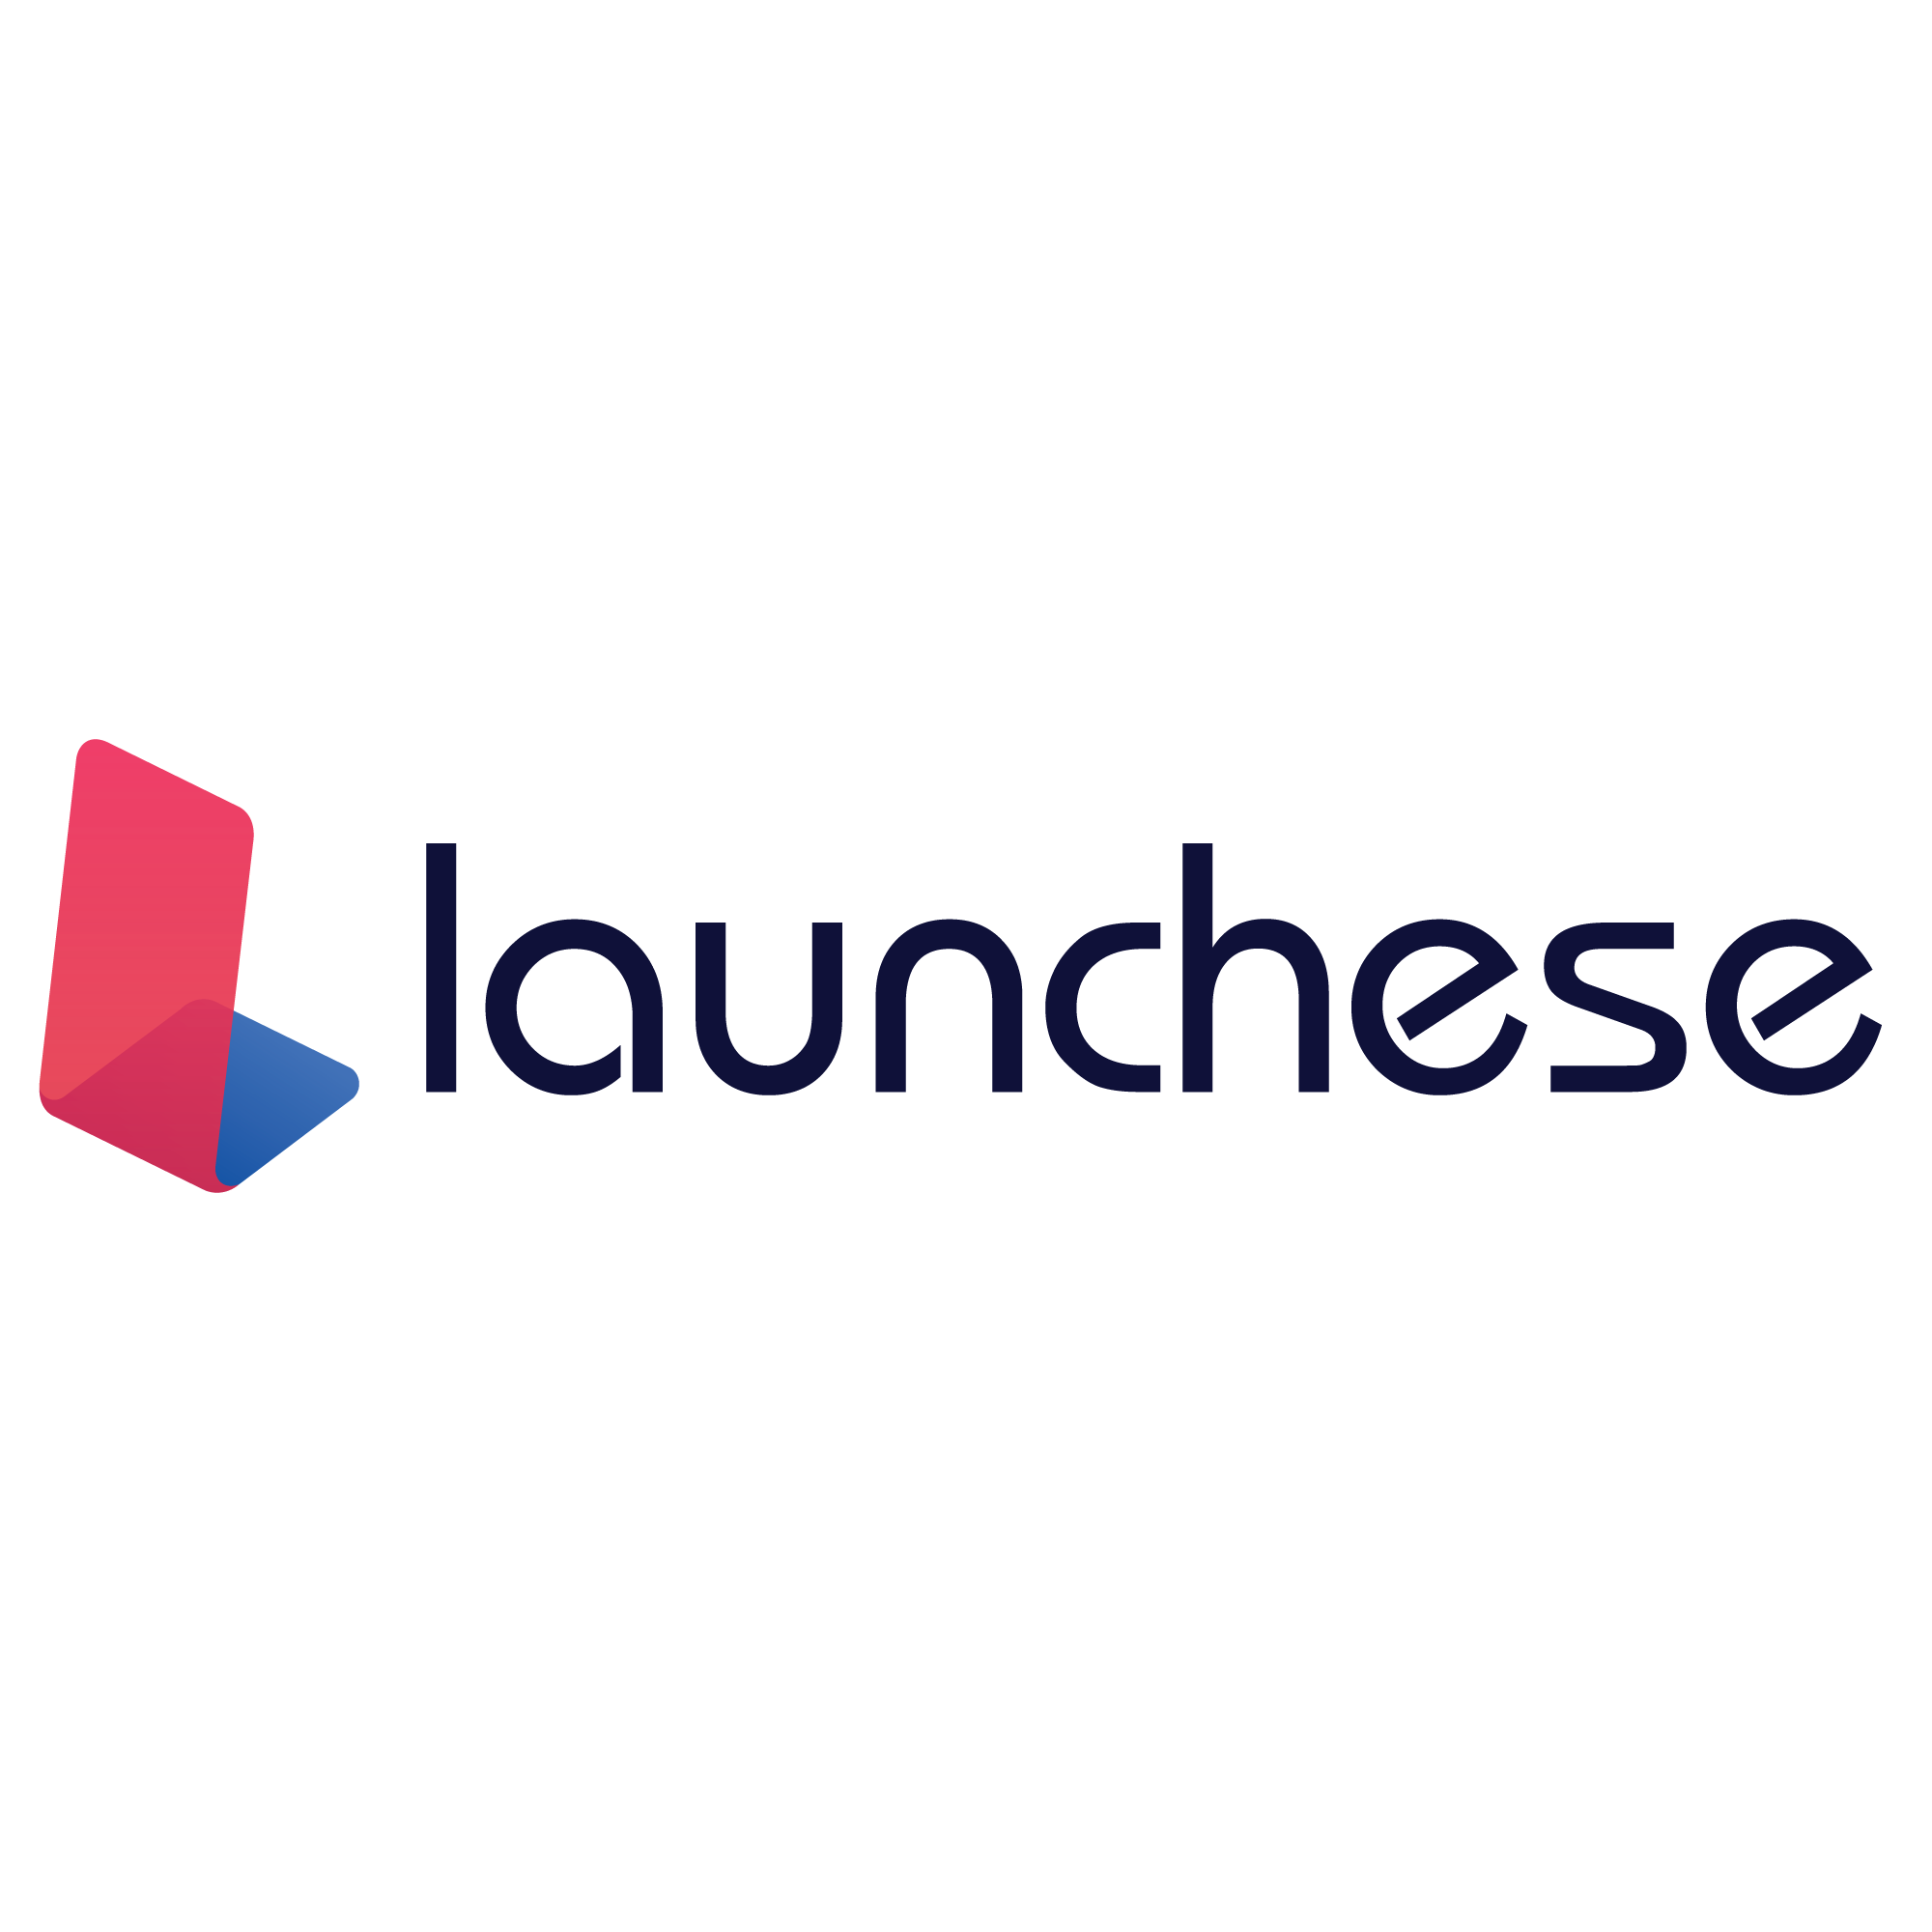 Launchese- Accounting and Bookkeeping Services in UK - London Professional Services